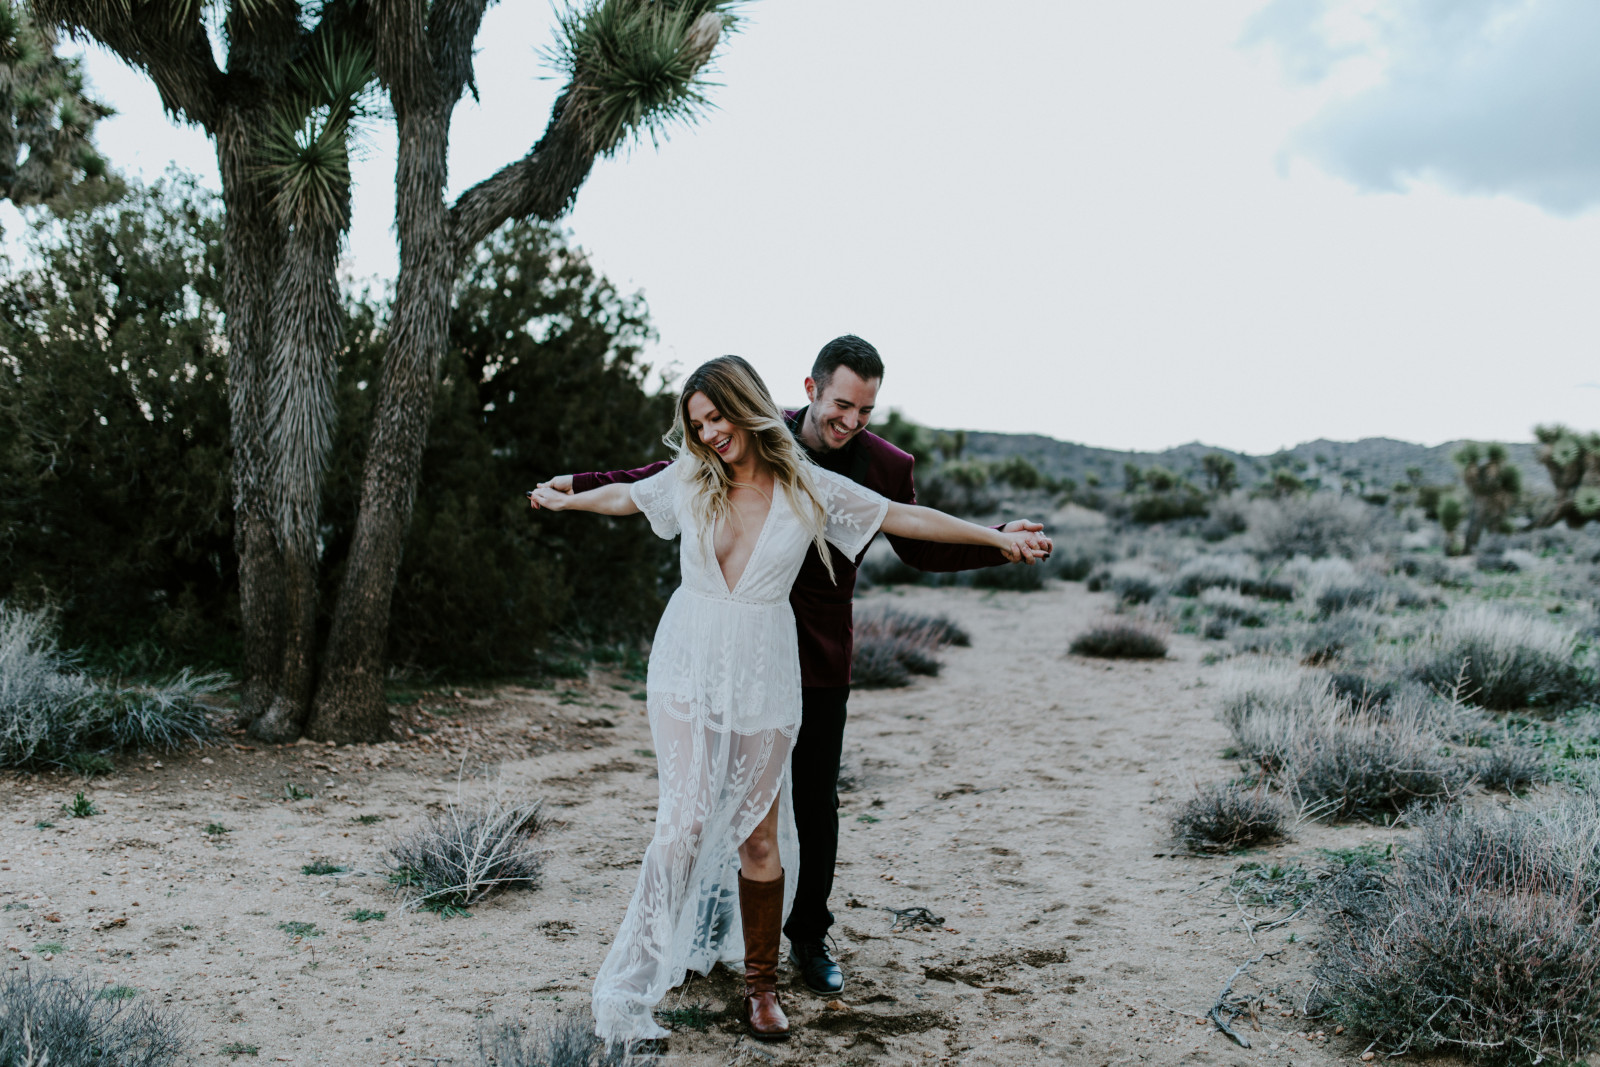 Alyssa sits with Jeremy at Joshua Tree National Park, CA Elopement wedding photography at Joshua Tree National Park by Sienna Plus Josh.